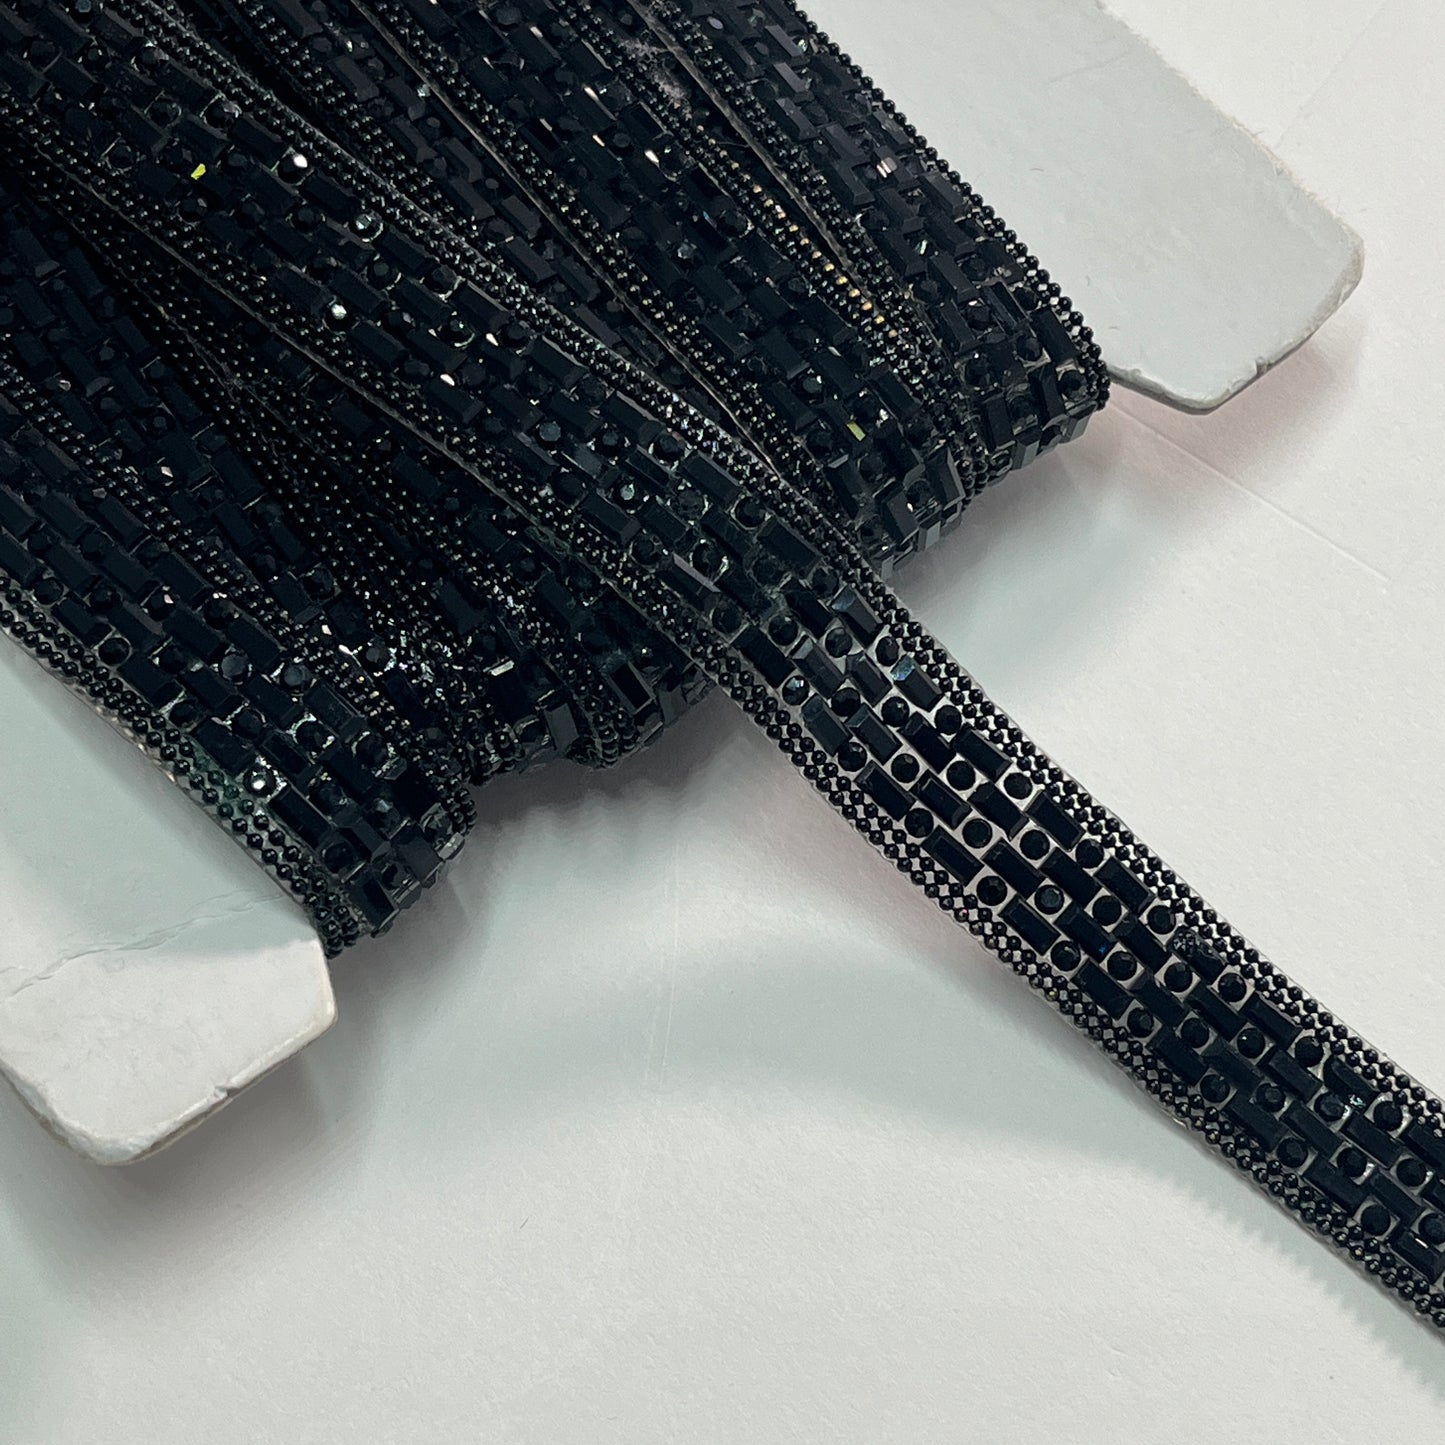 A stunning Art Deco inspired trim created with crystals and baguette shaped polished stones for sparkle, with a tiny twin bead edging. This is an iron-on embellishment with a transparent gel backing film and is very easy to cut to length.